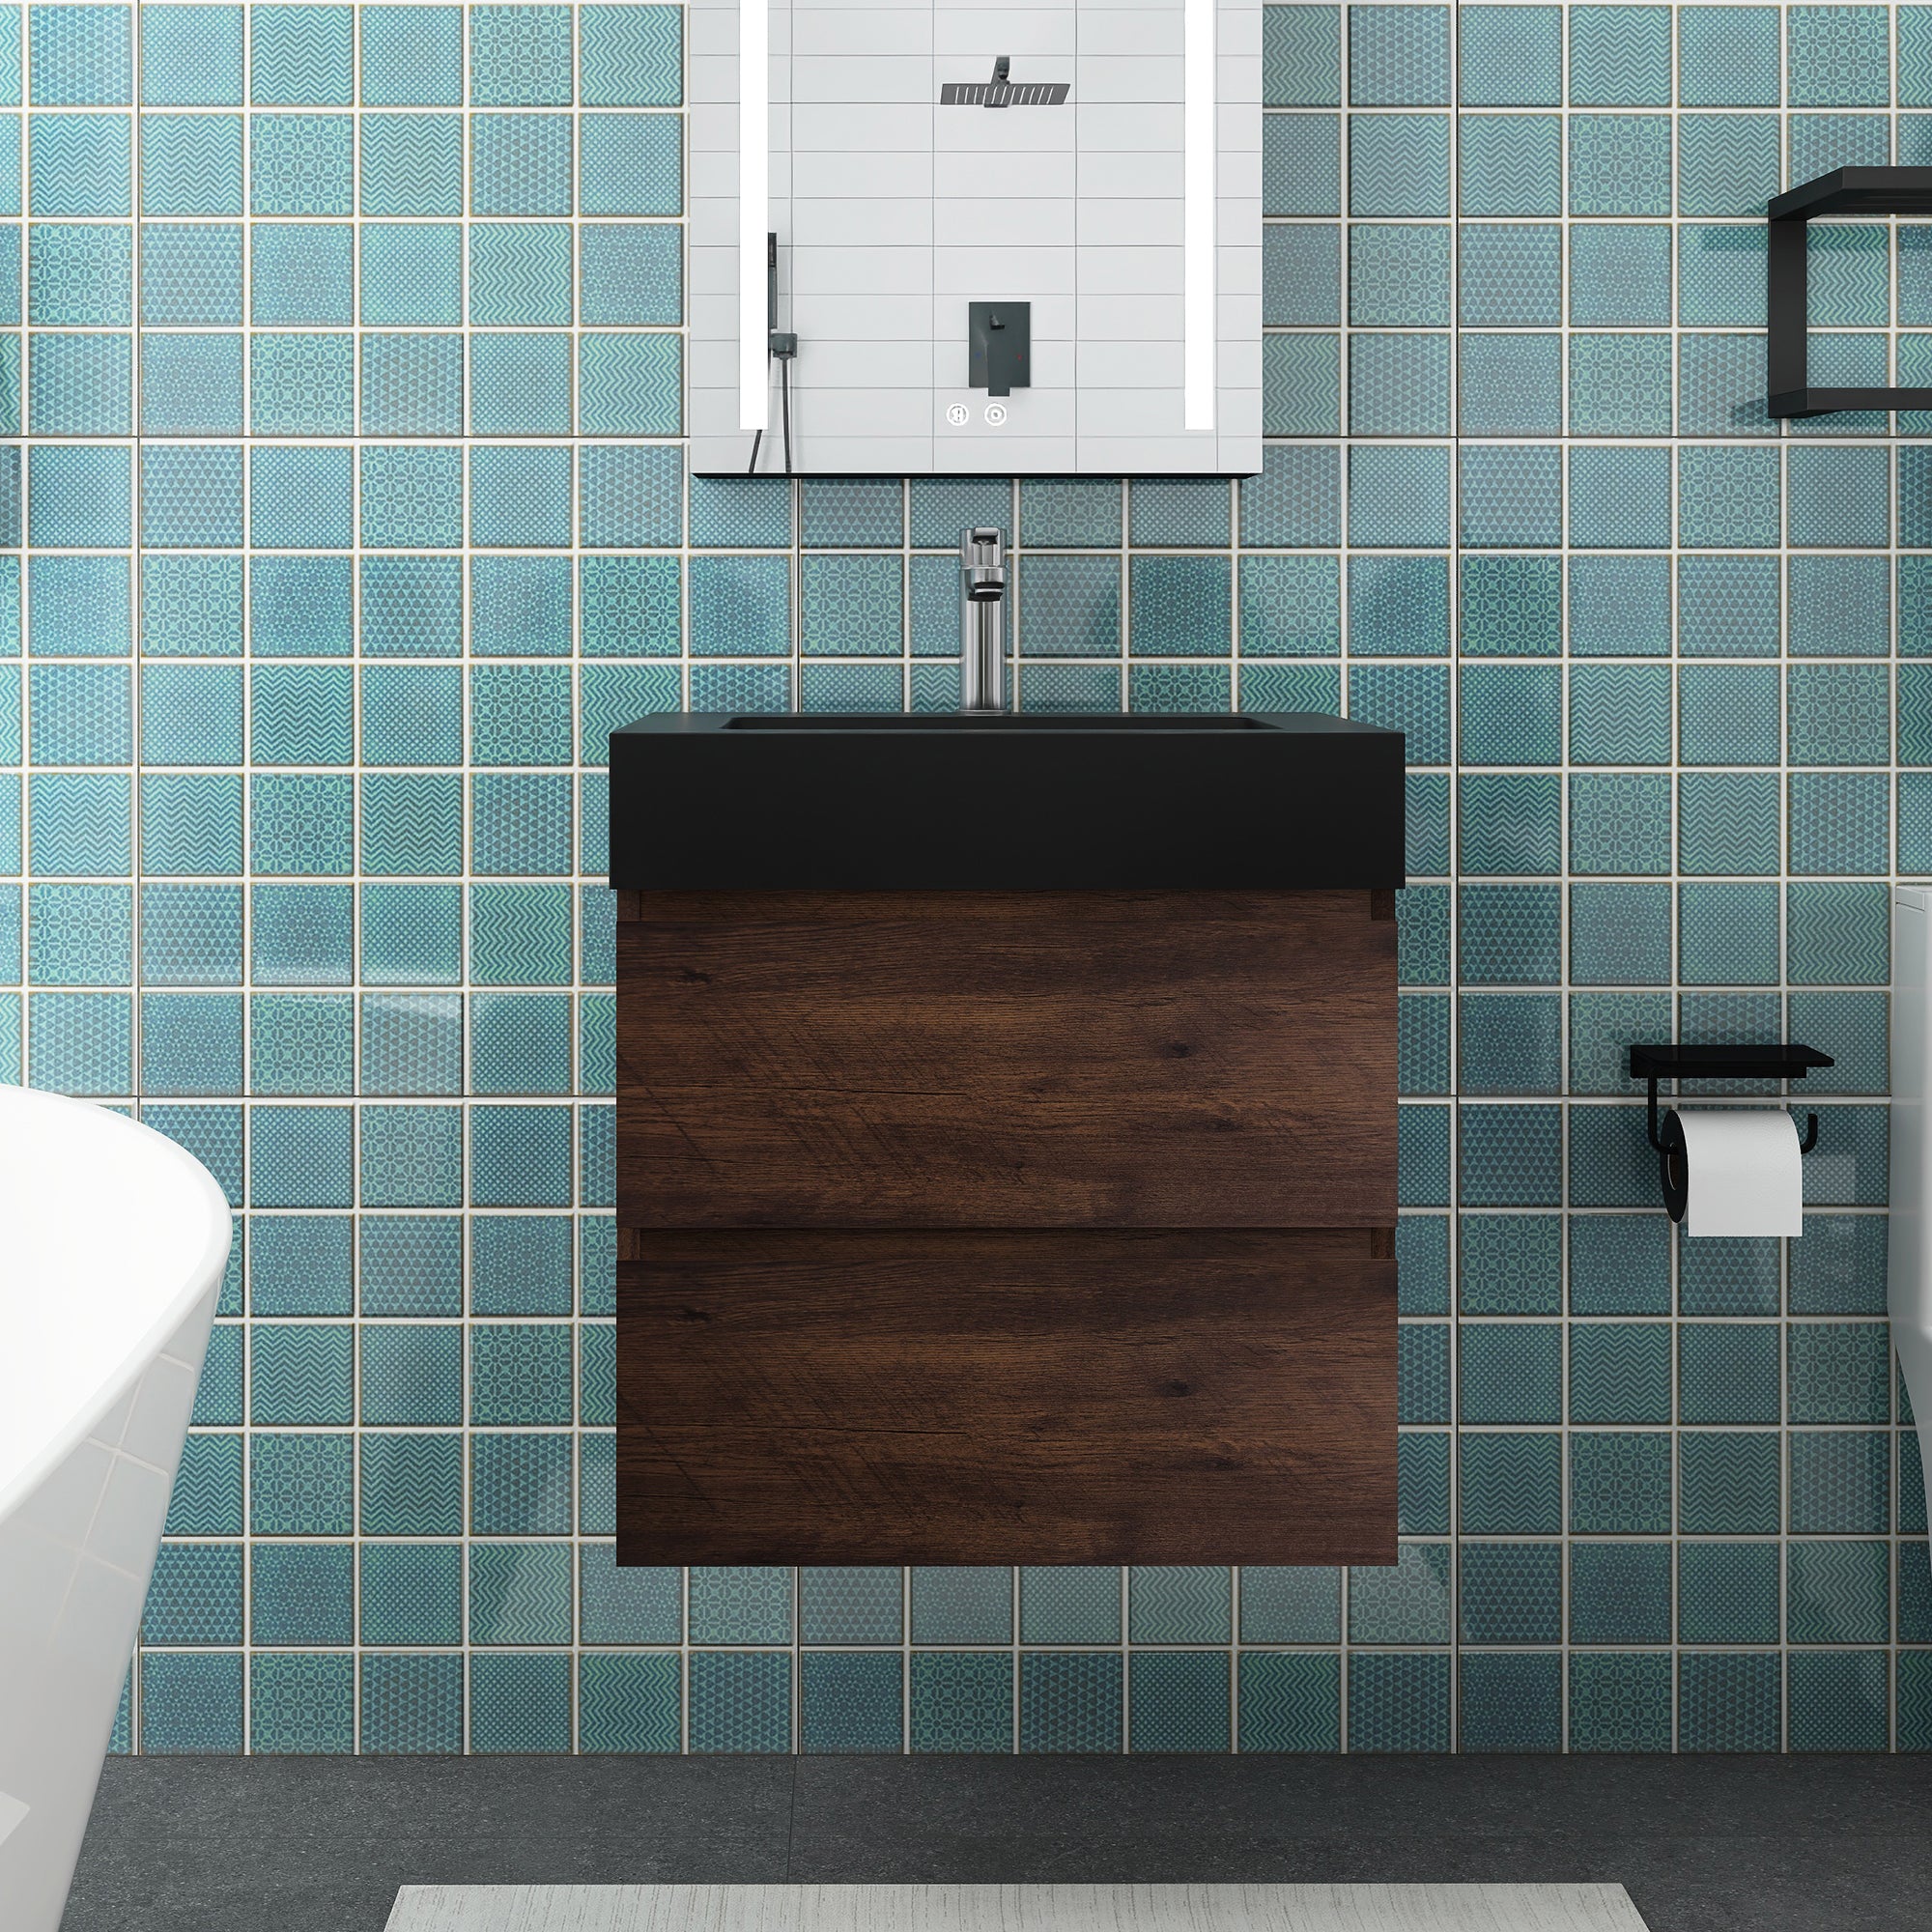 Staykiwi Wall-Mounted Bathroom Vanity Set with Black Integrated Solid Surface Sink